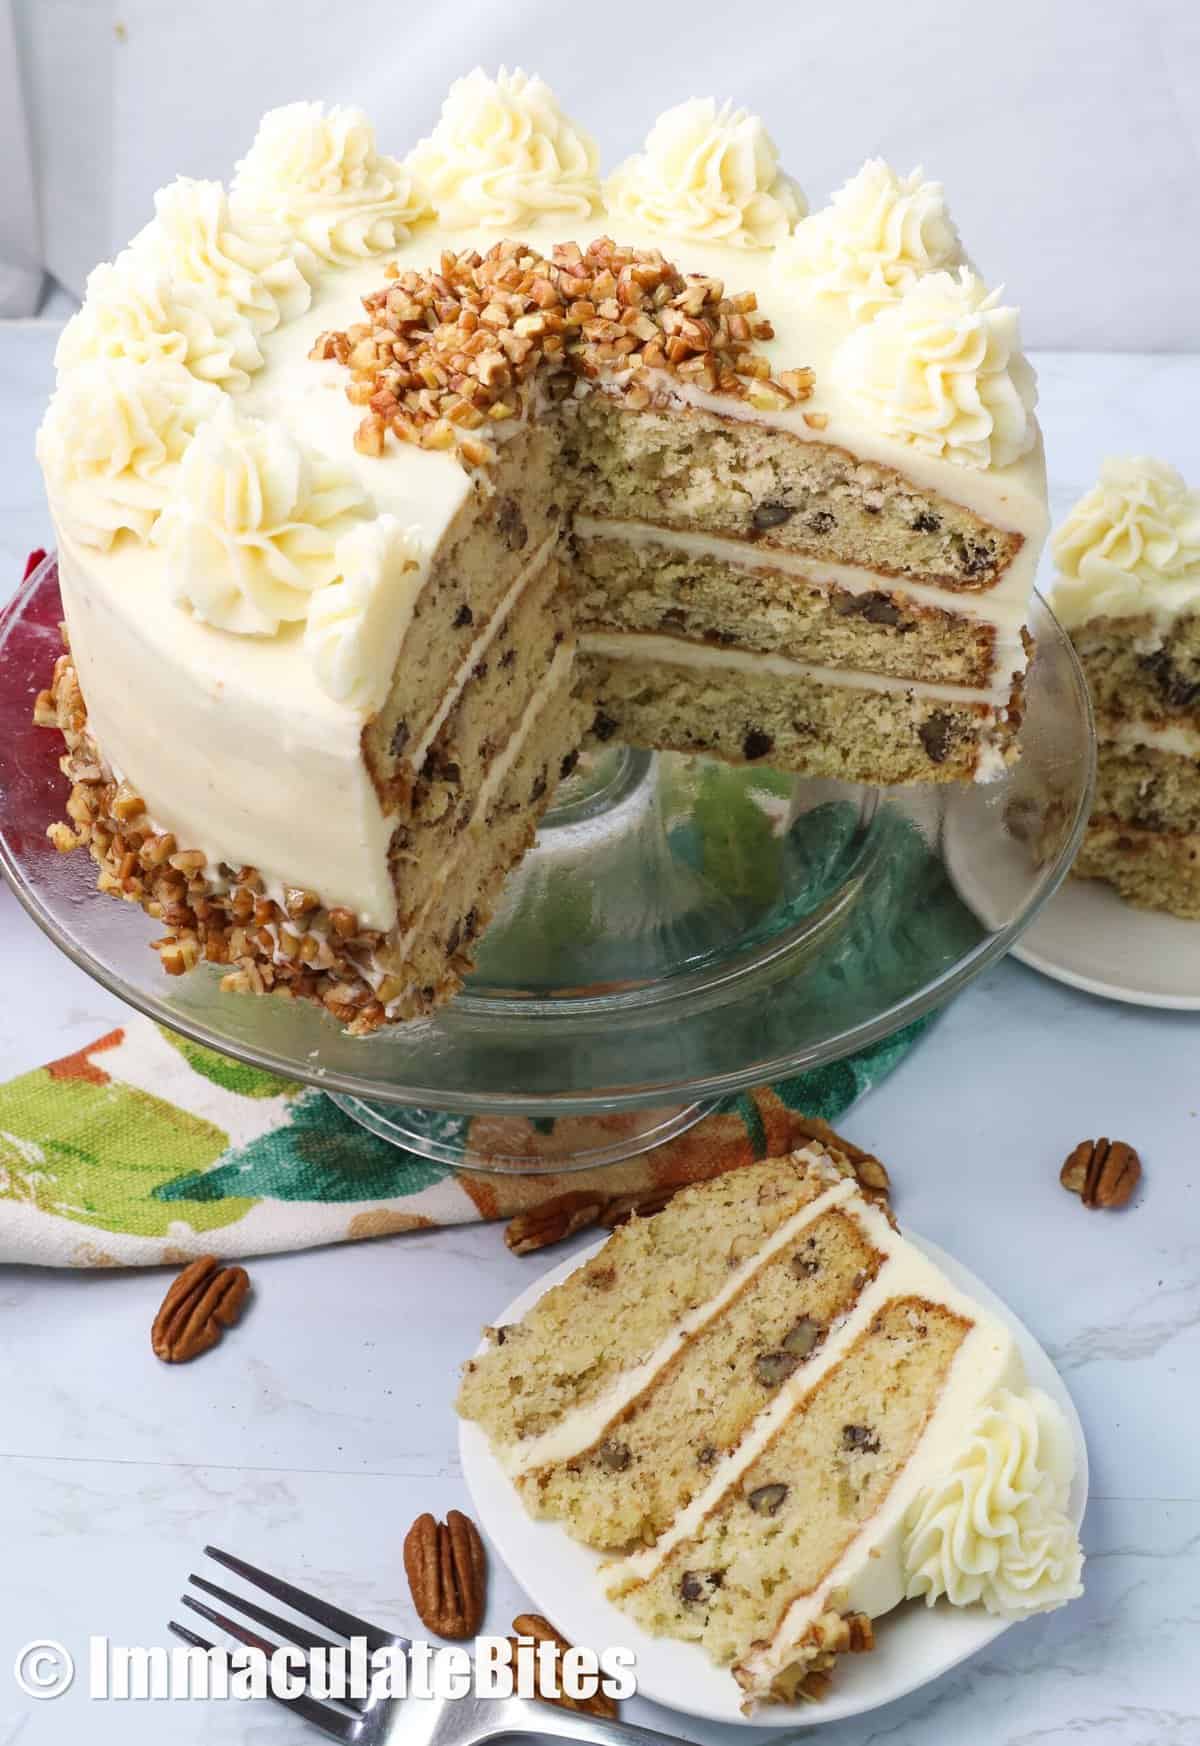 Italian cream cake with two slices served